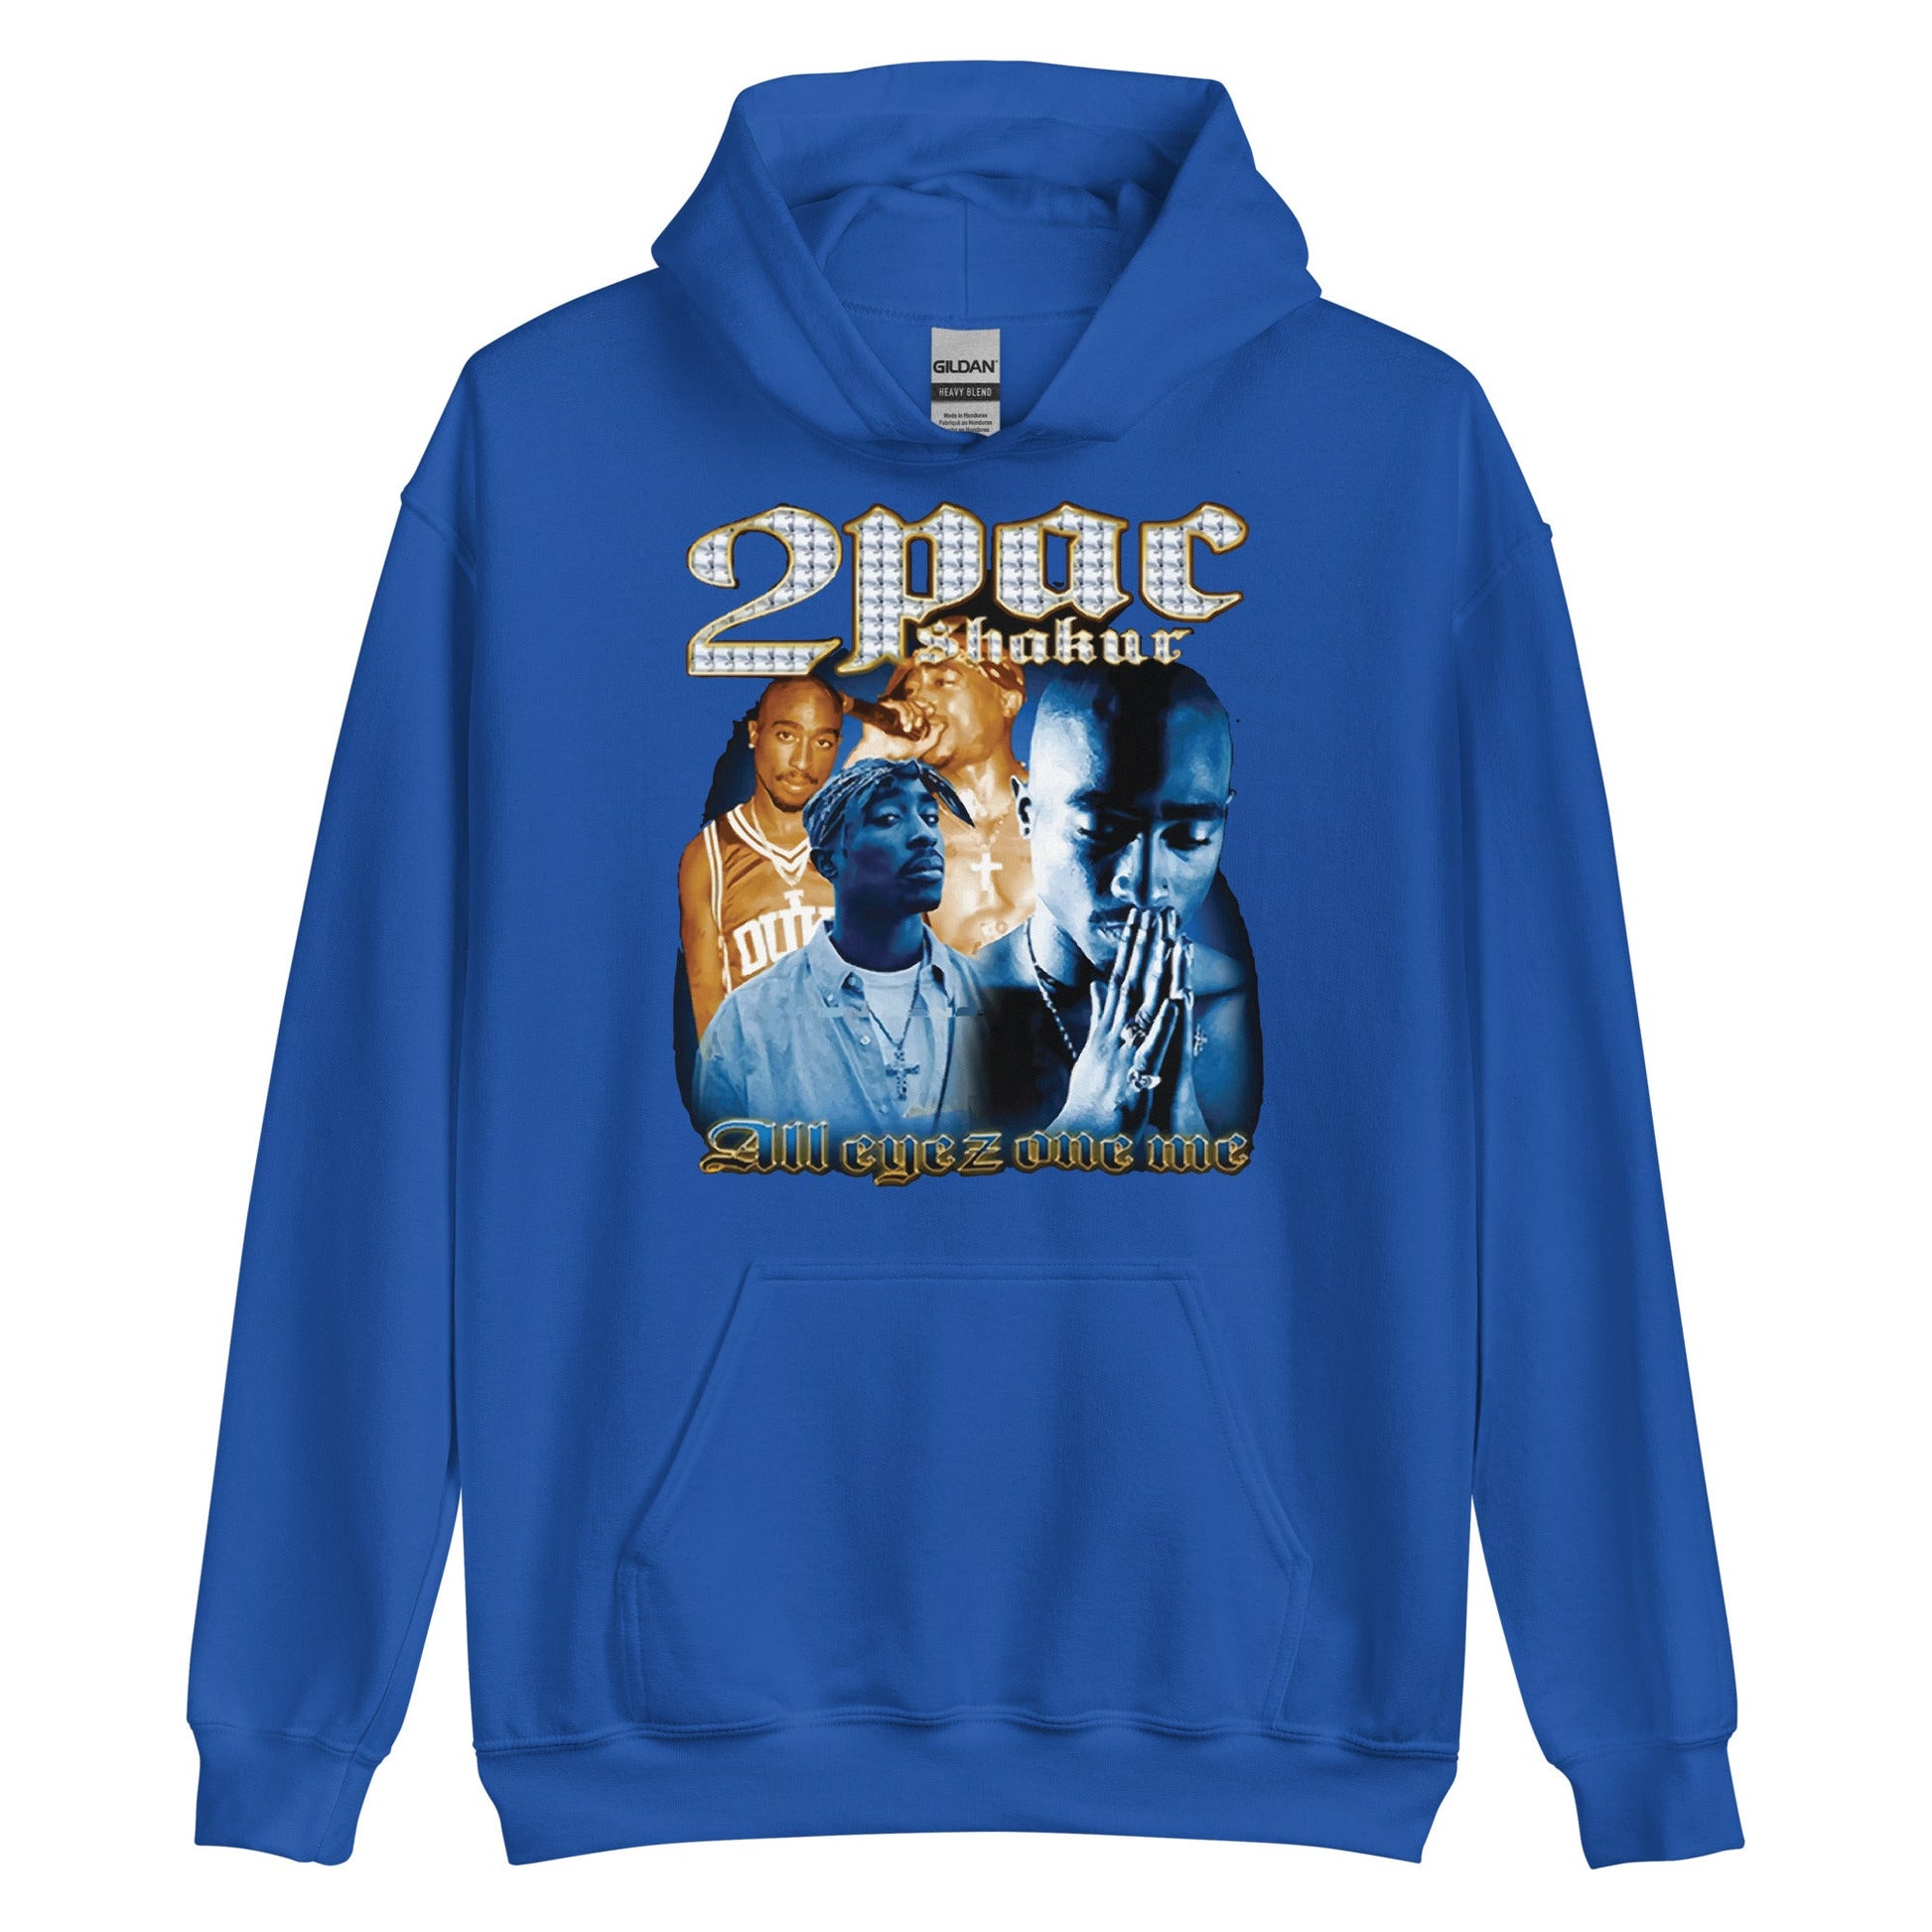 All Eyes on Me: 2Pac Tribute" Hoodie - The Truth Graphics